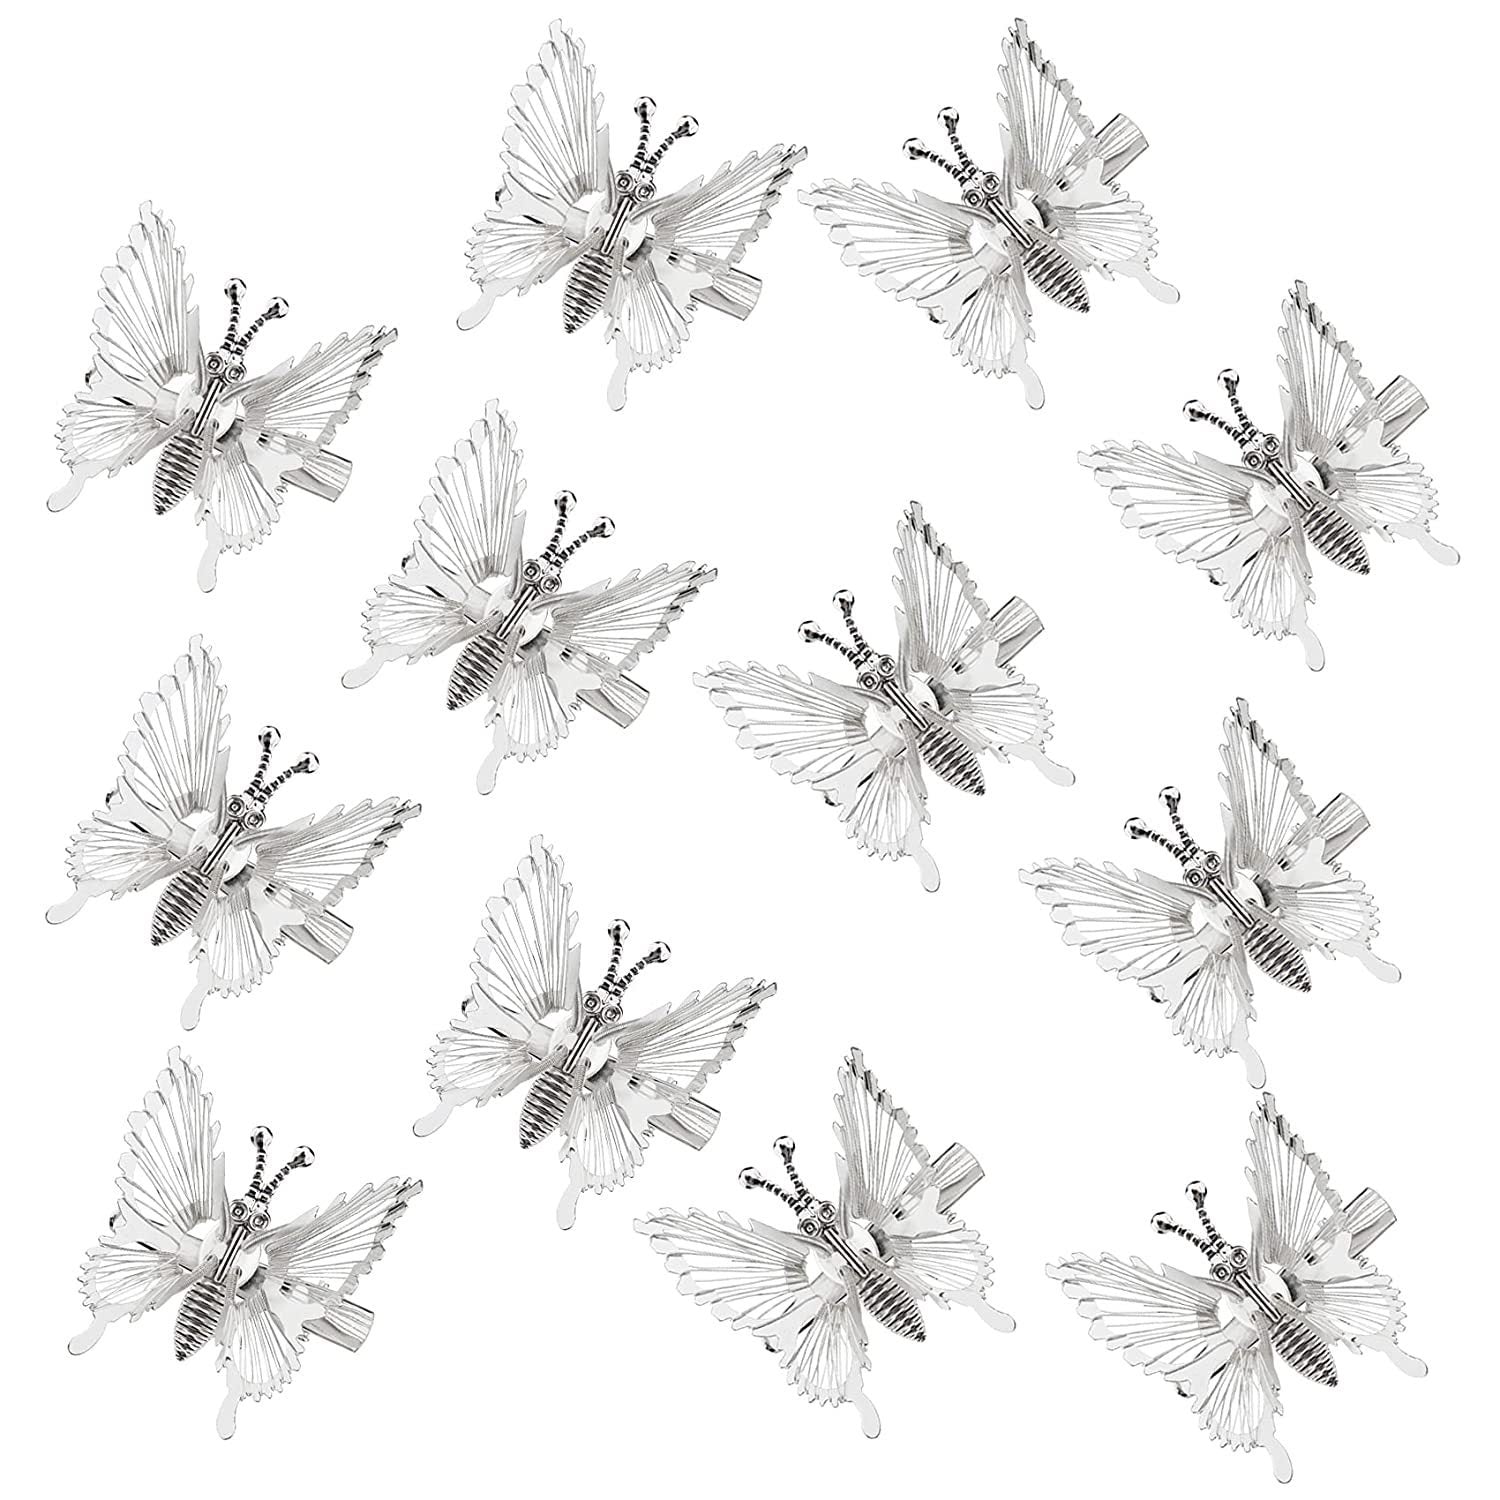 Toyotress 12 PCS 3D Moving Butterfly Hair Clips Cute Metal Butterfly Clips for Hair